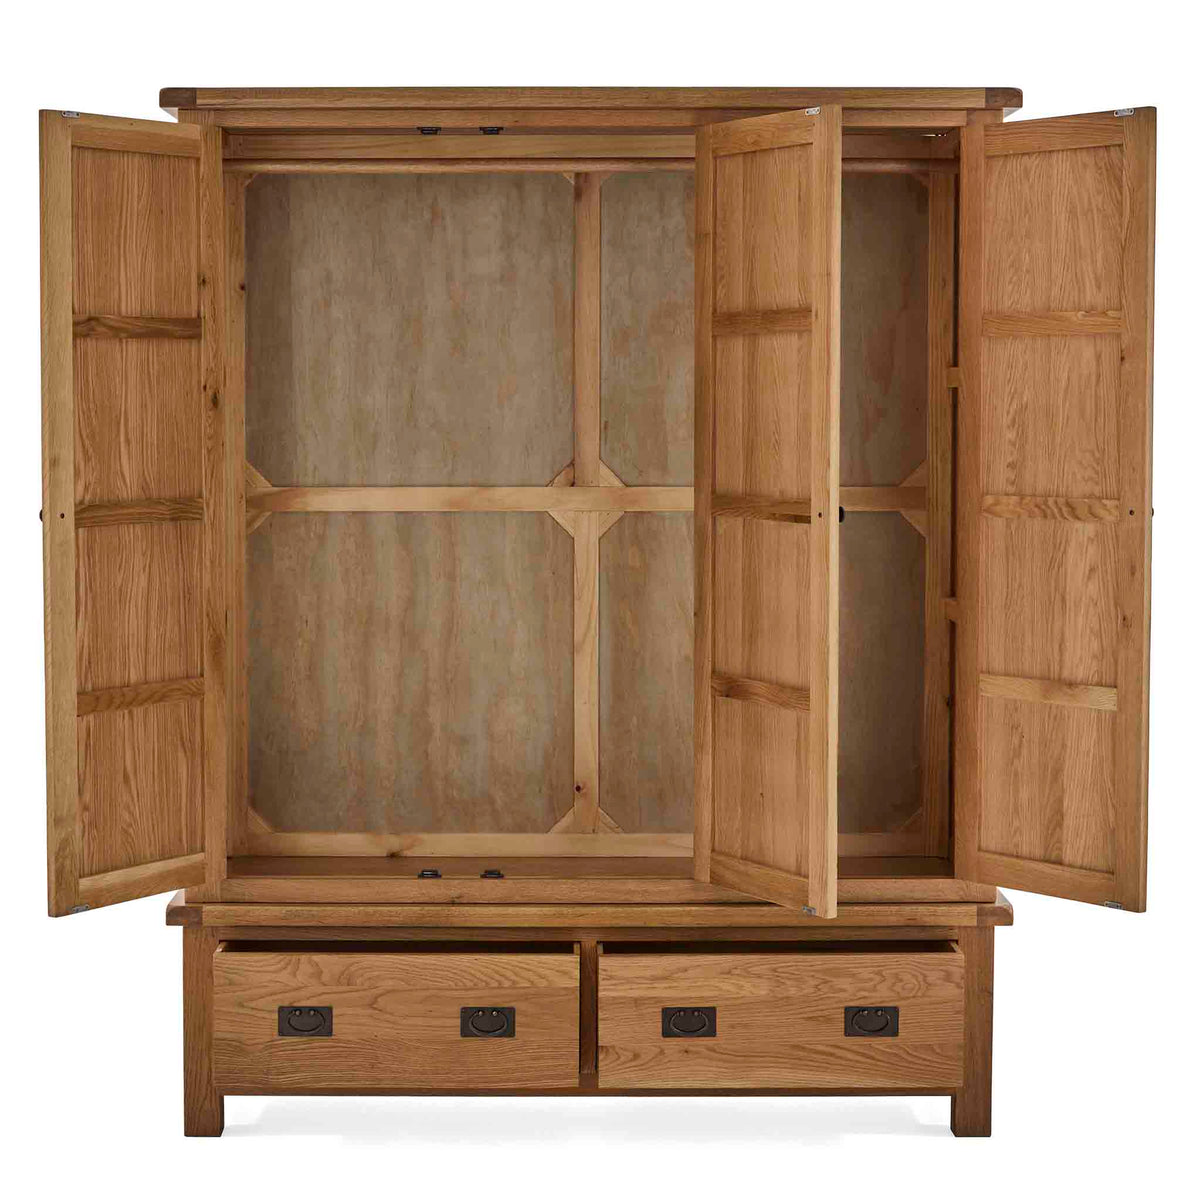 Zelah Oak Triple Wardrobe with Drawers - Front view with doors and drawers open